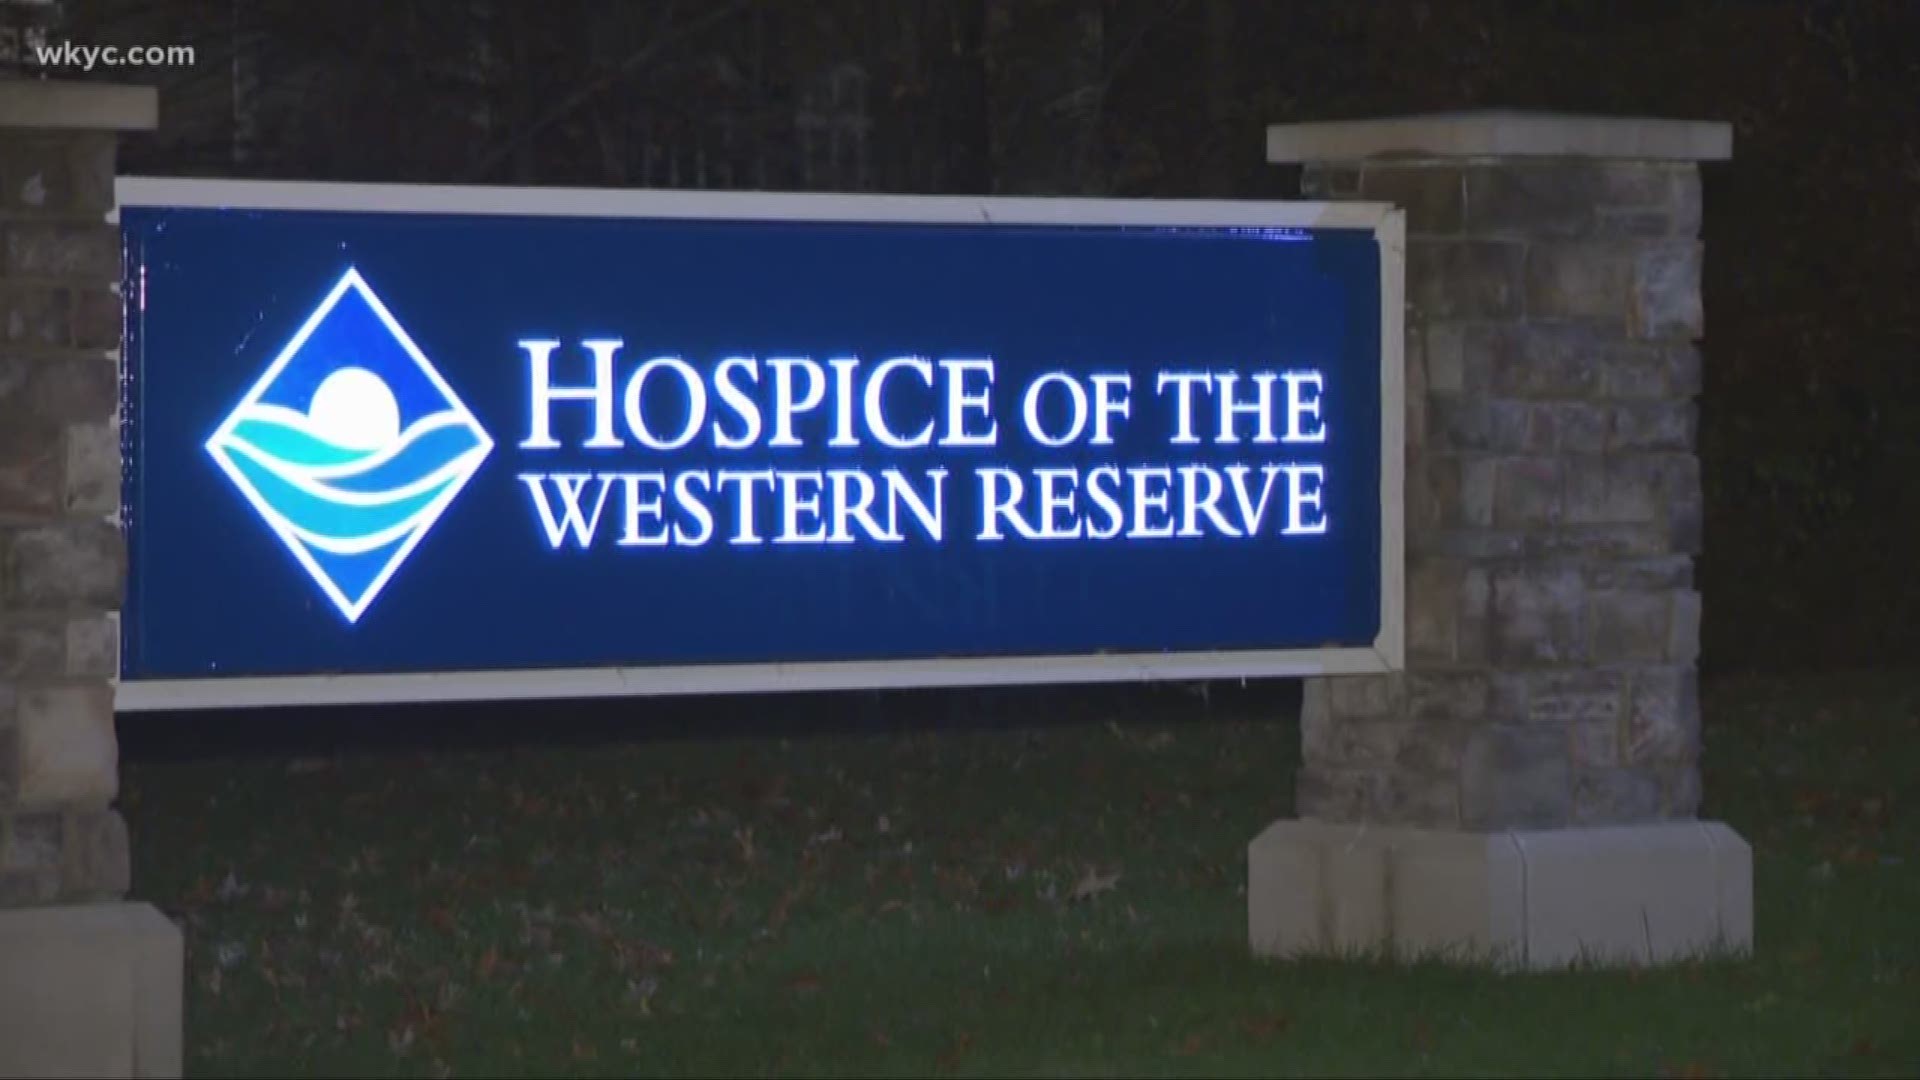 Employees at Western Reserve Hospice get sick after possibly eating drugged brownies